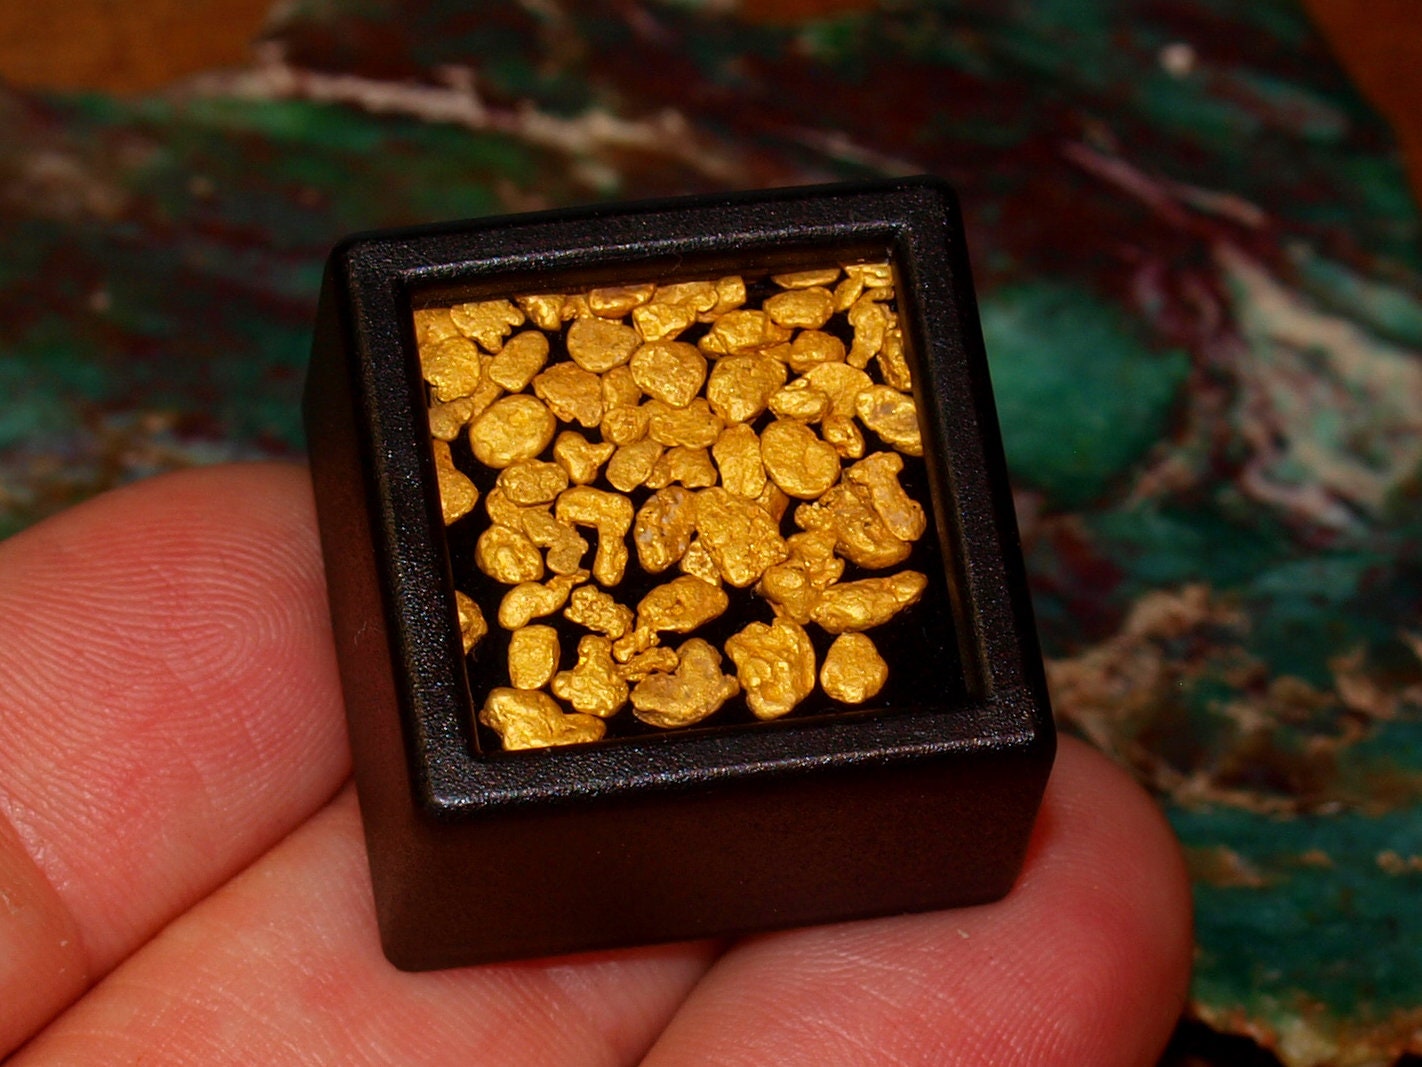 Alaska Gold Nuggets Genuine Natural Placer Gold Raw Gold Real Gold Minerals  Precious Metal 4.29 Grams N1819 